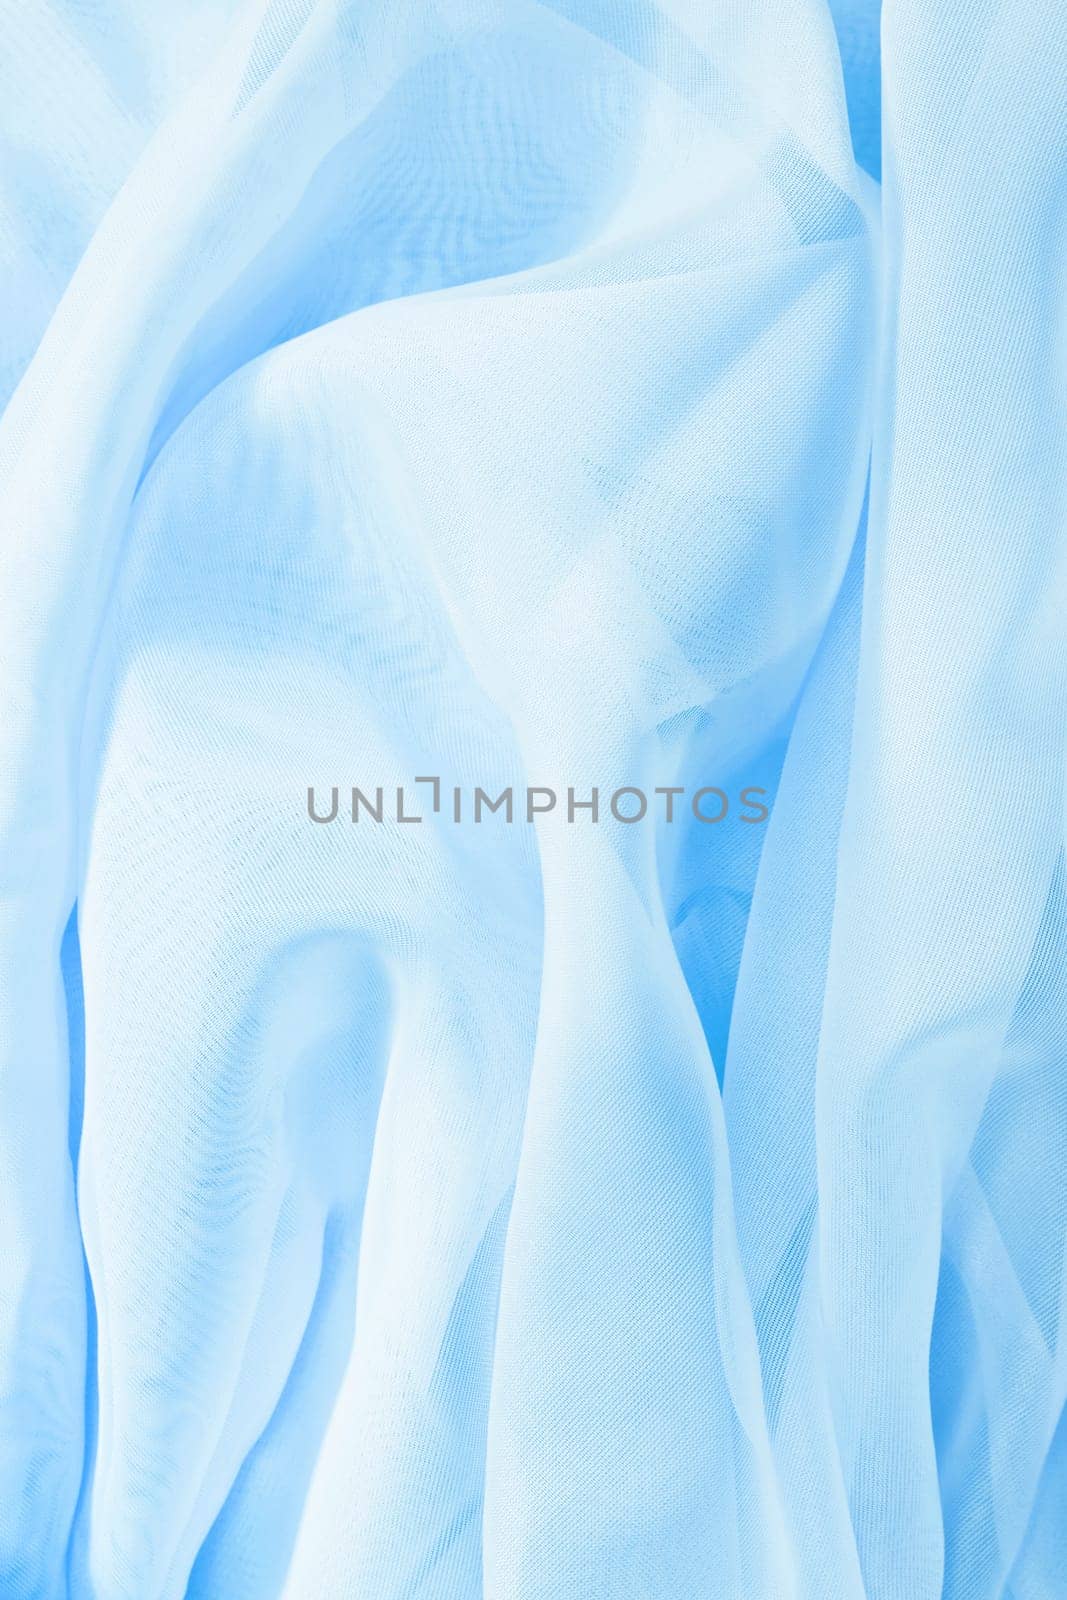 wavy silk fabric - soft background and texture styled concept, elegant visuals